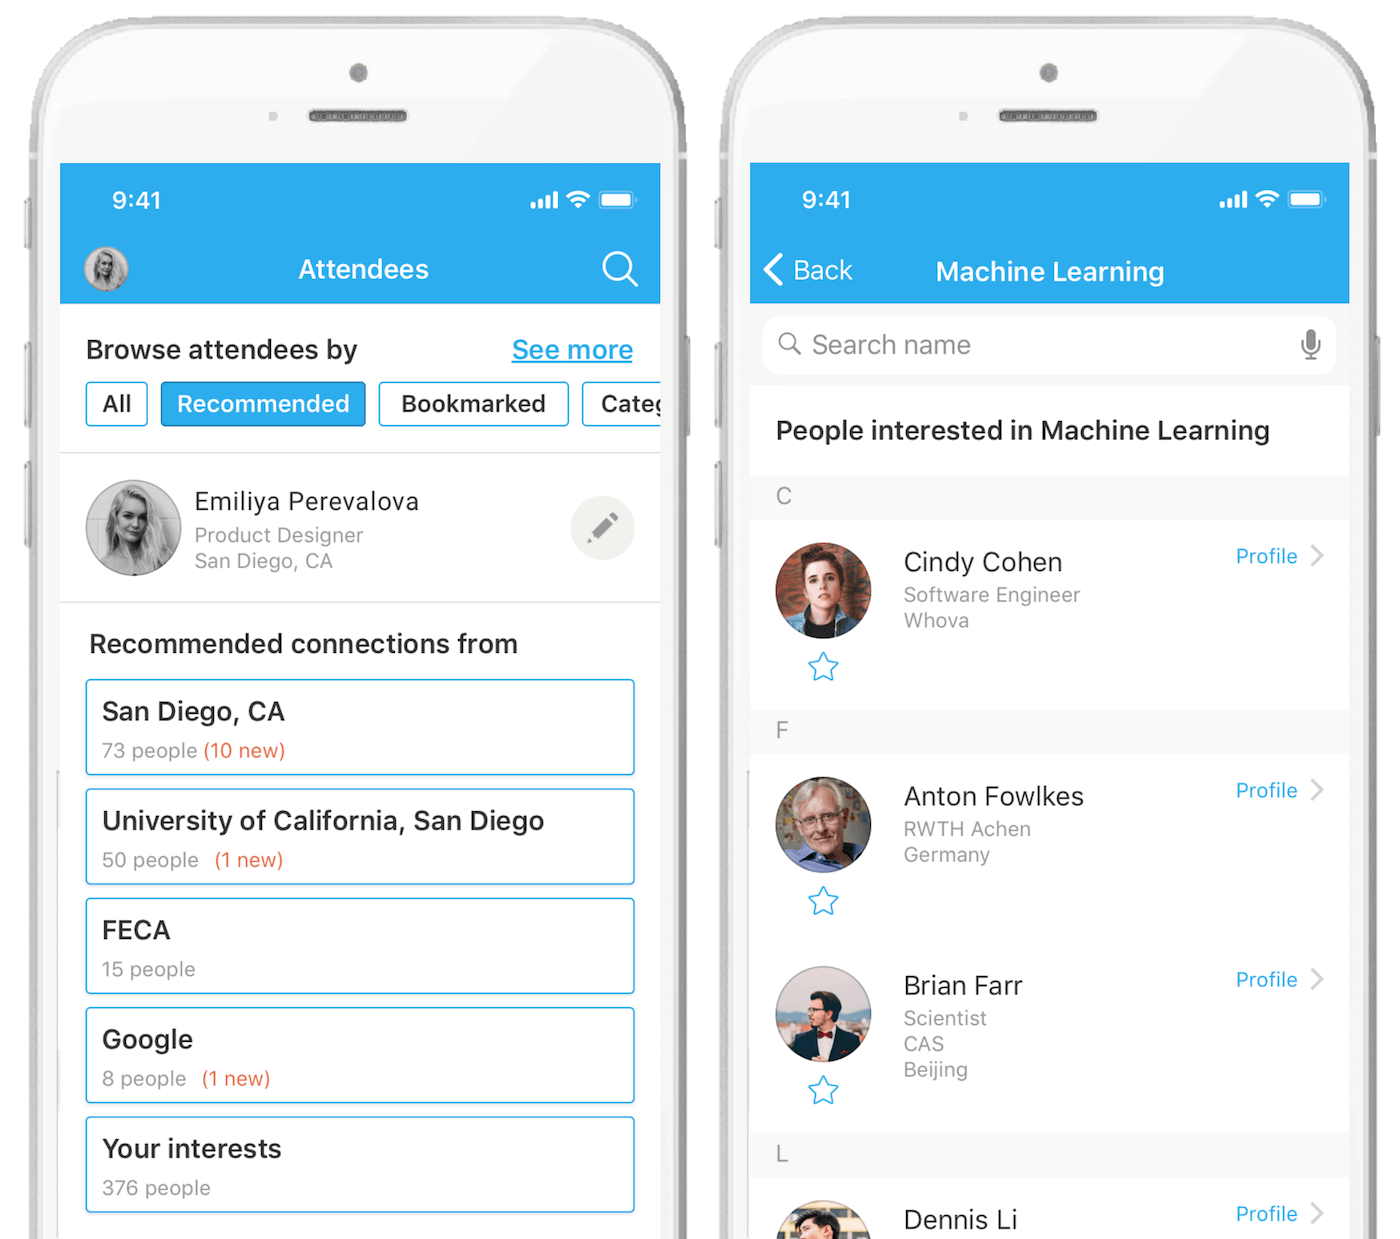 Download Whova: The Professional Networking App for Conferences